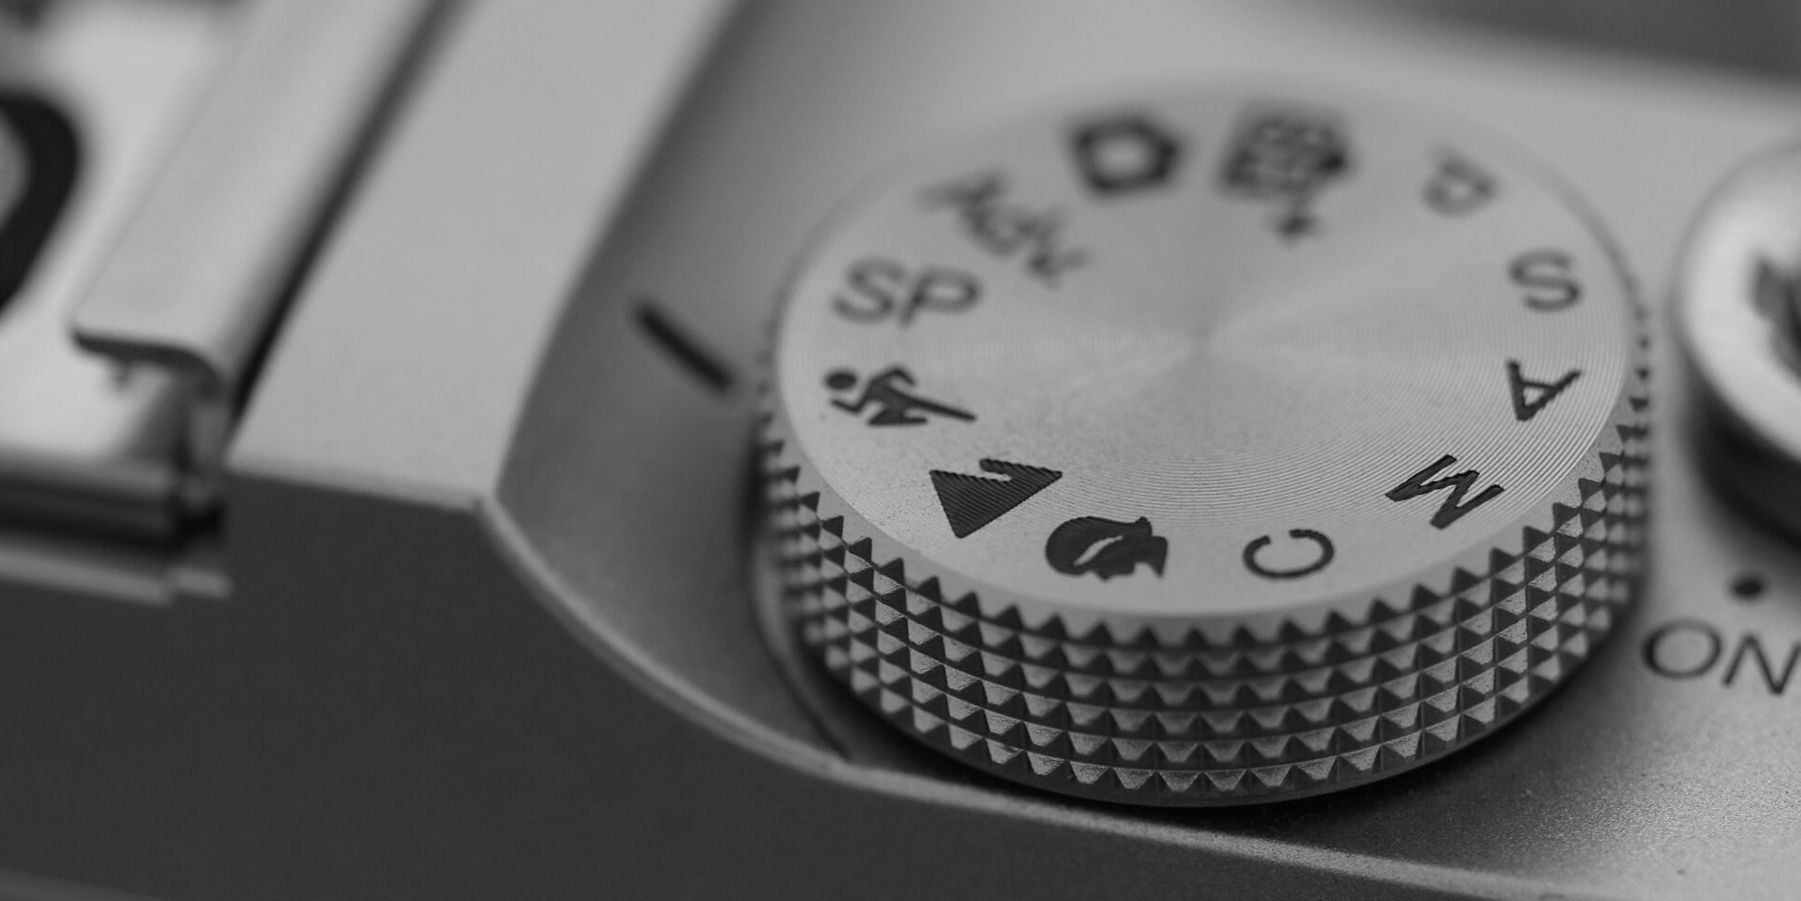 The top dial of an old film camera